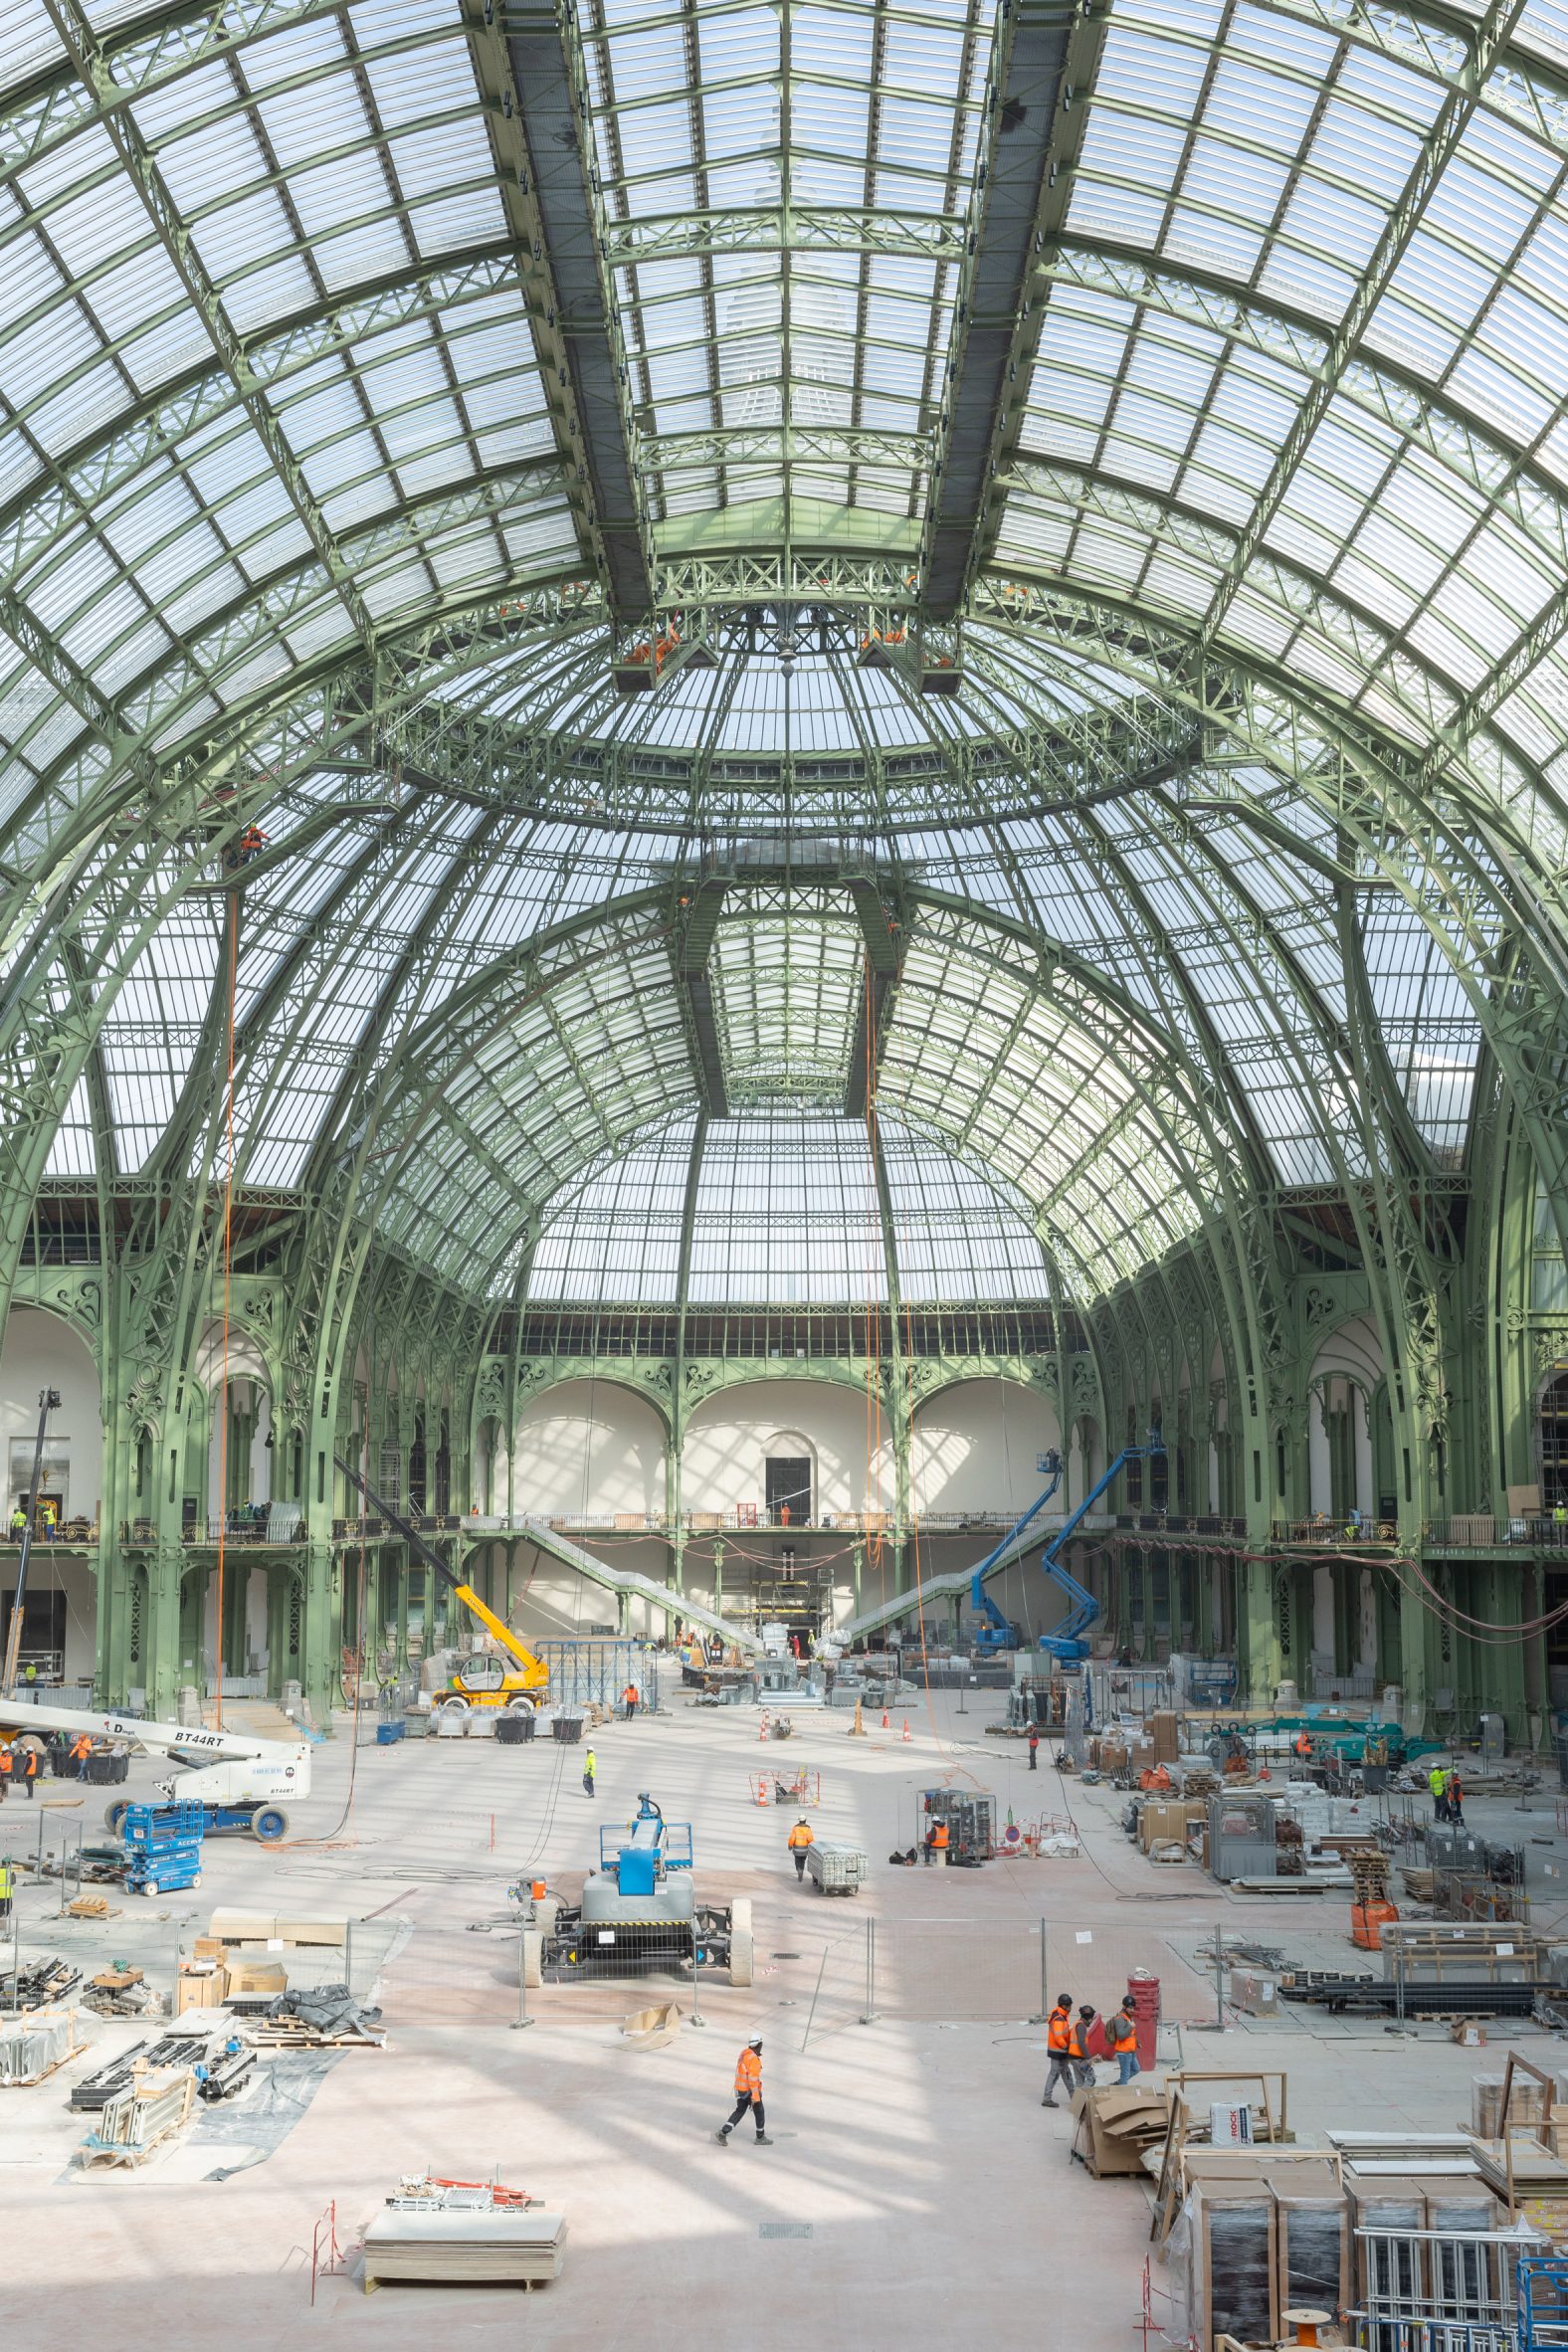 The nave of the Grand Palais in Paris